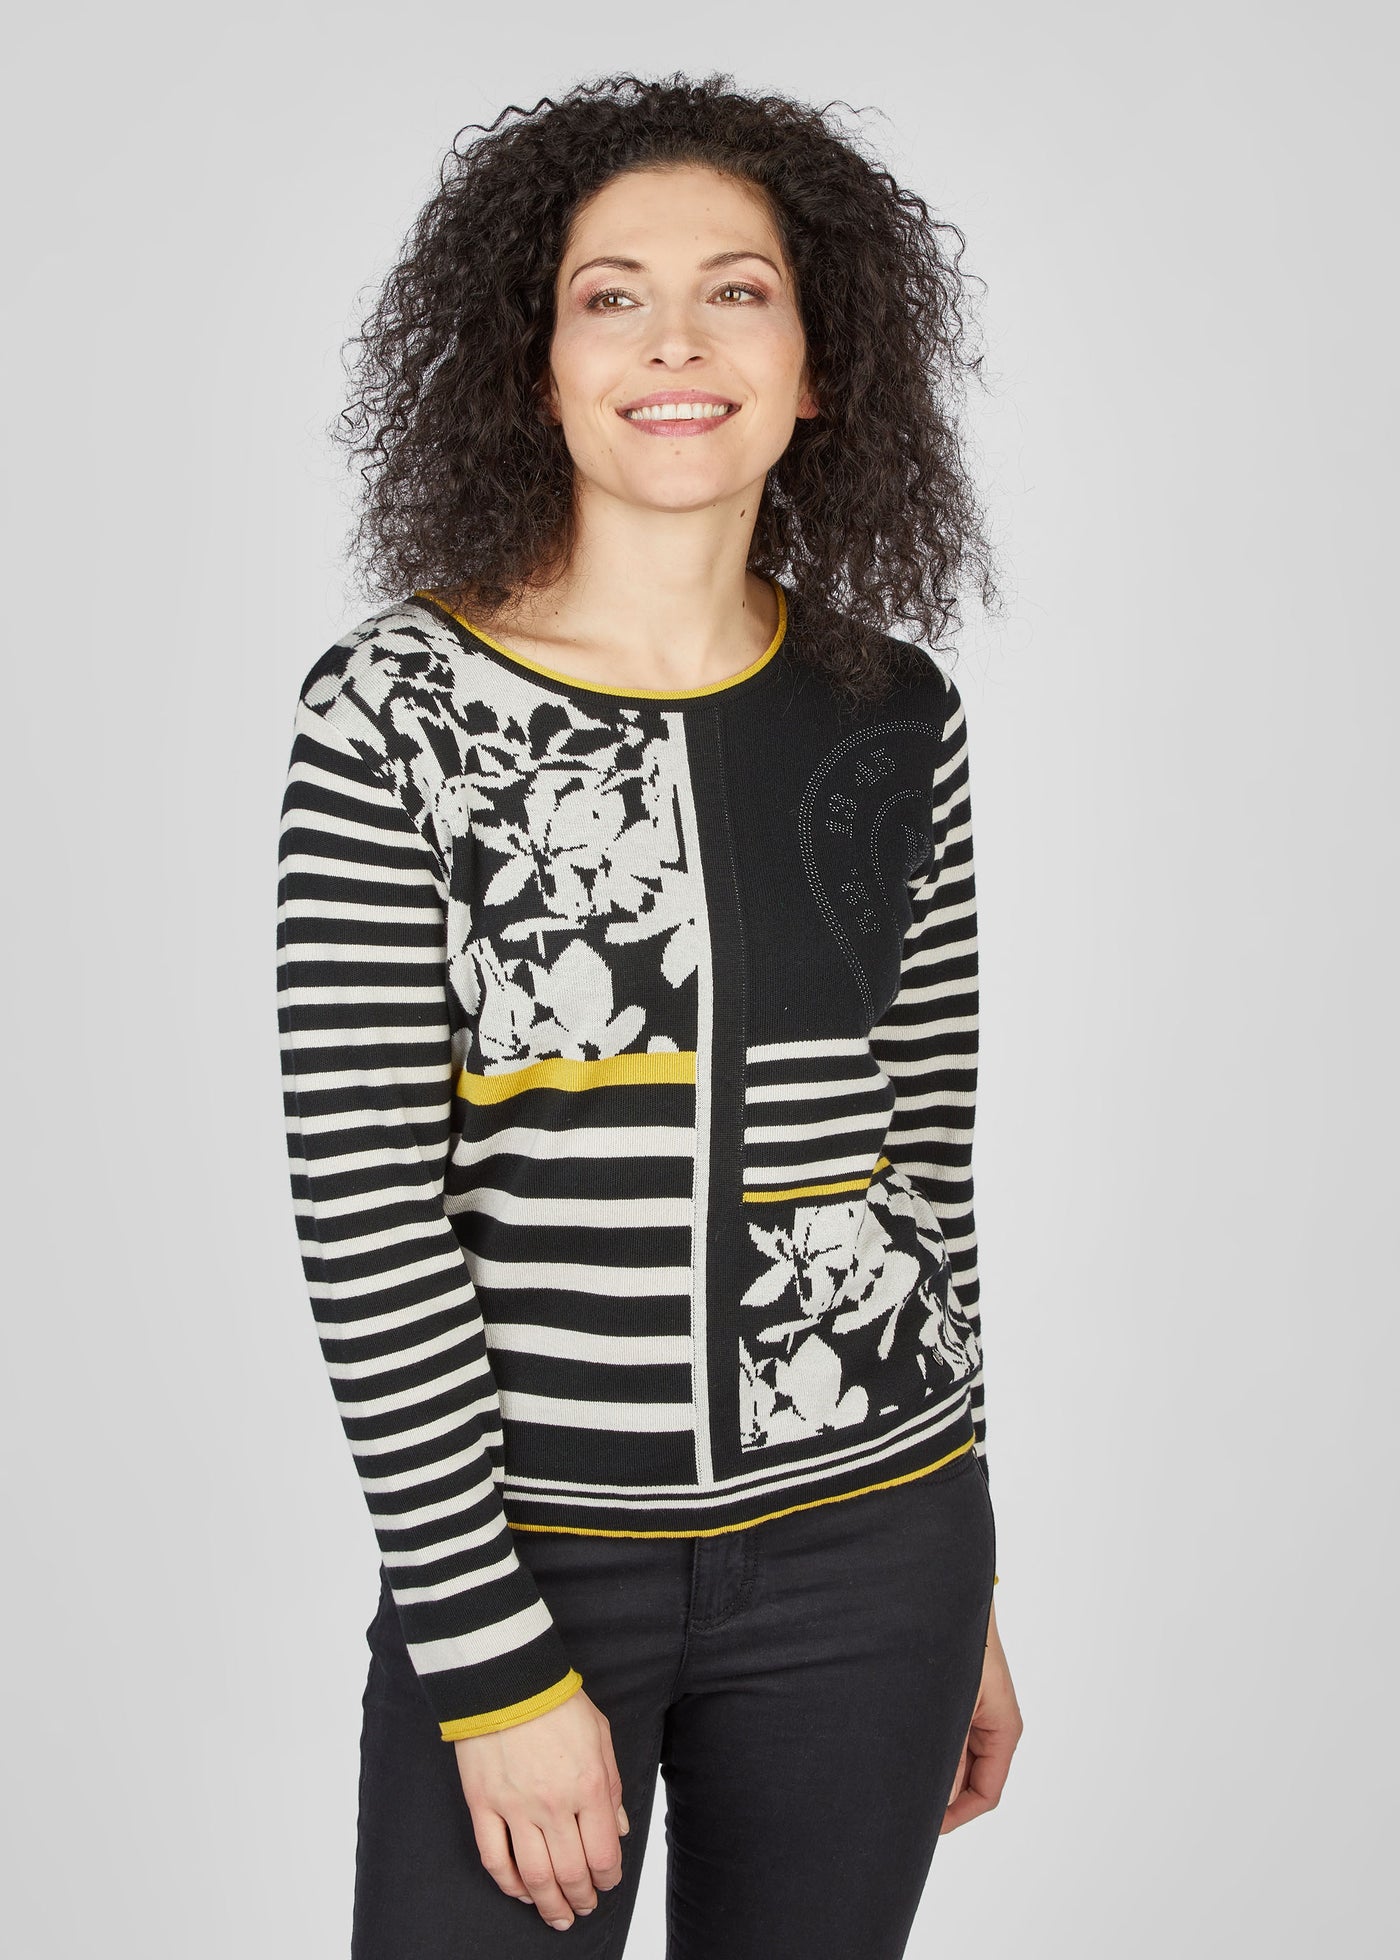 Black & White Striped Jumper with Diamonte Detail and Mustard Trim